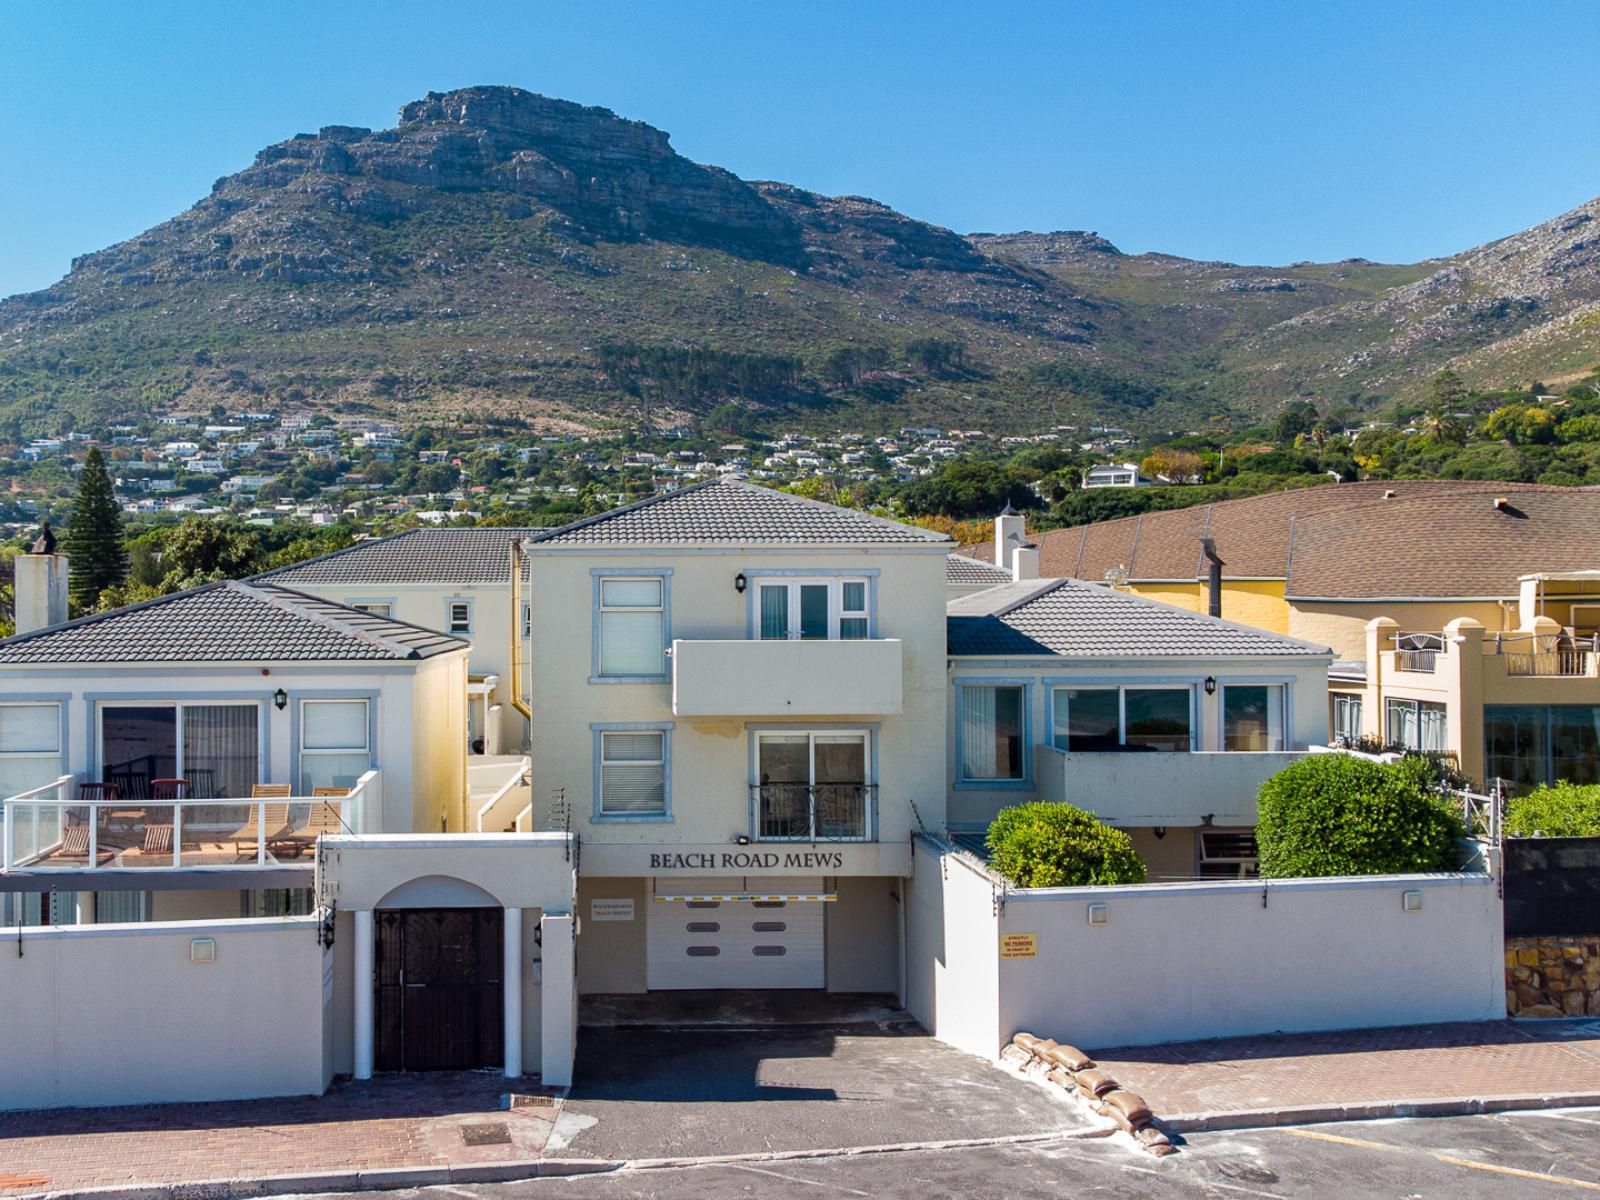 Village Self Catering Apartments Scott Estate Cape Town Western Cape South Africa House, Building, Architecture, Mountain, Nature